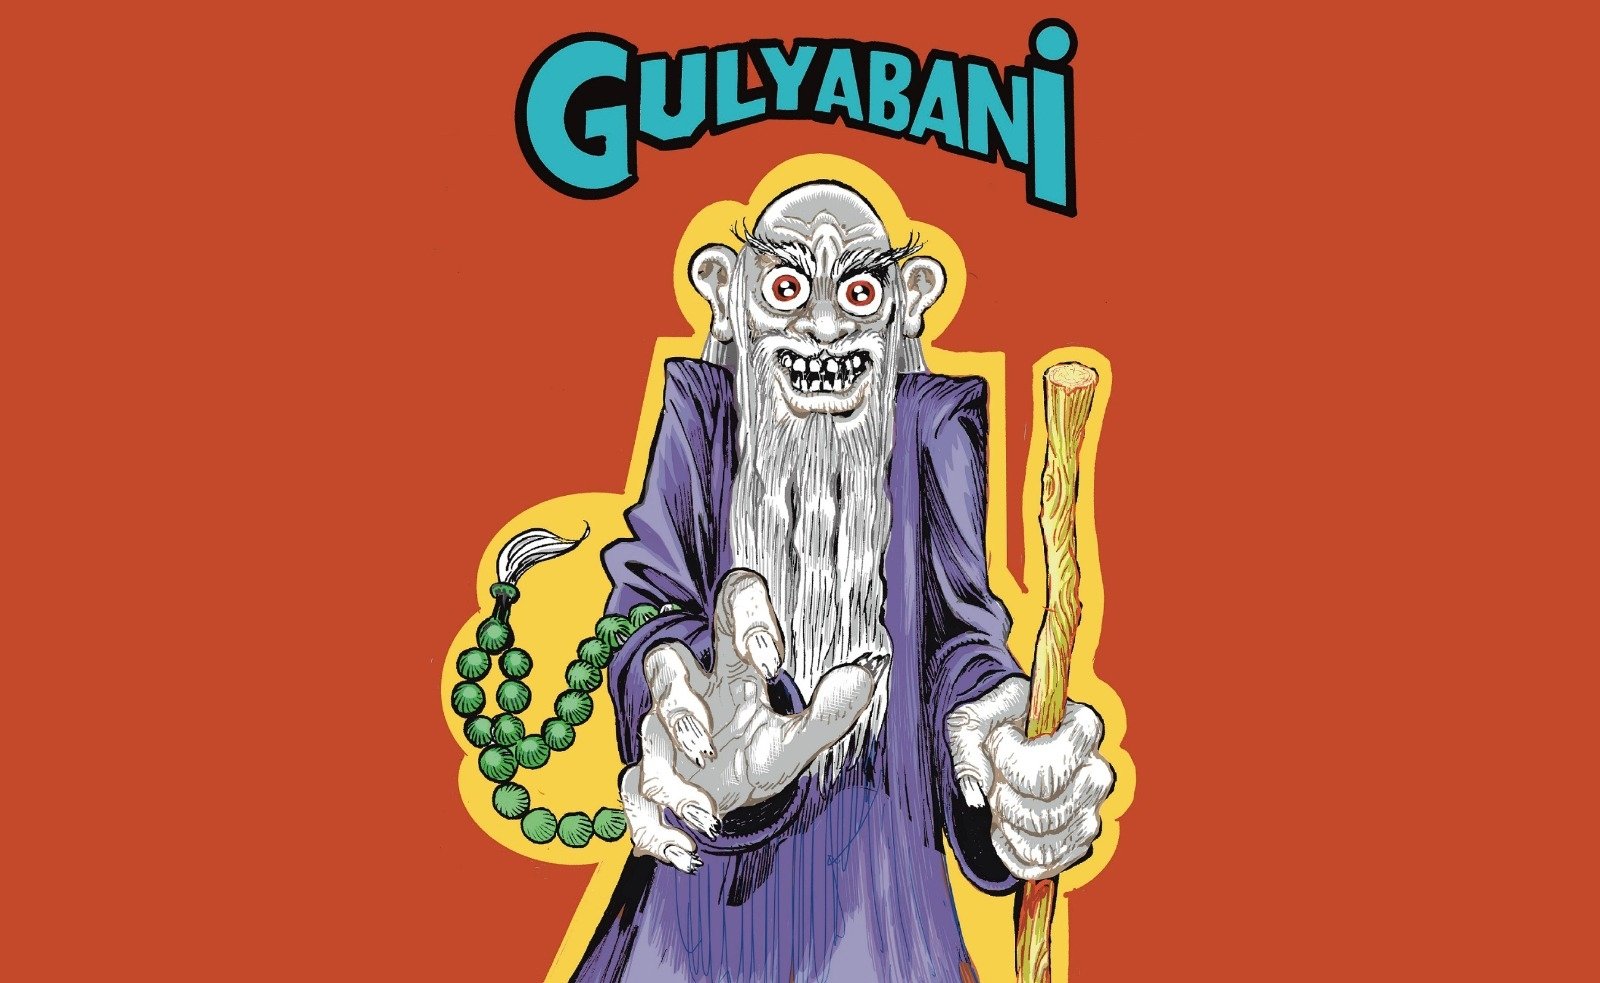 Artwork from the exhibition depicts &quot;Gulyabani,&quot; a humongous ghoul with a long beard who wanders at night and scares people in the eponymous Turkish horror-comedy film.